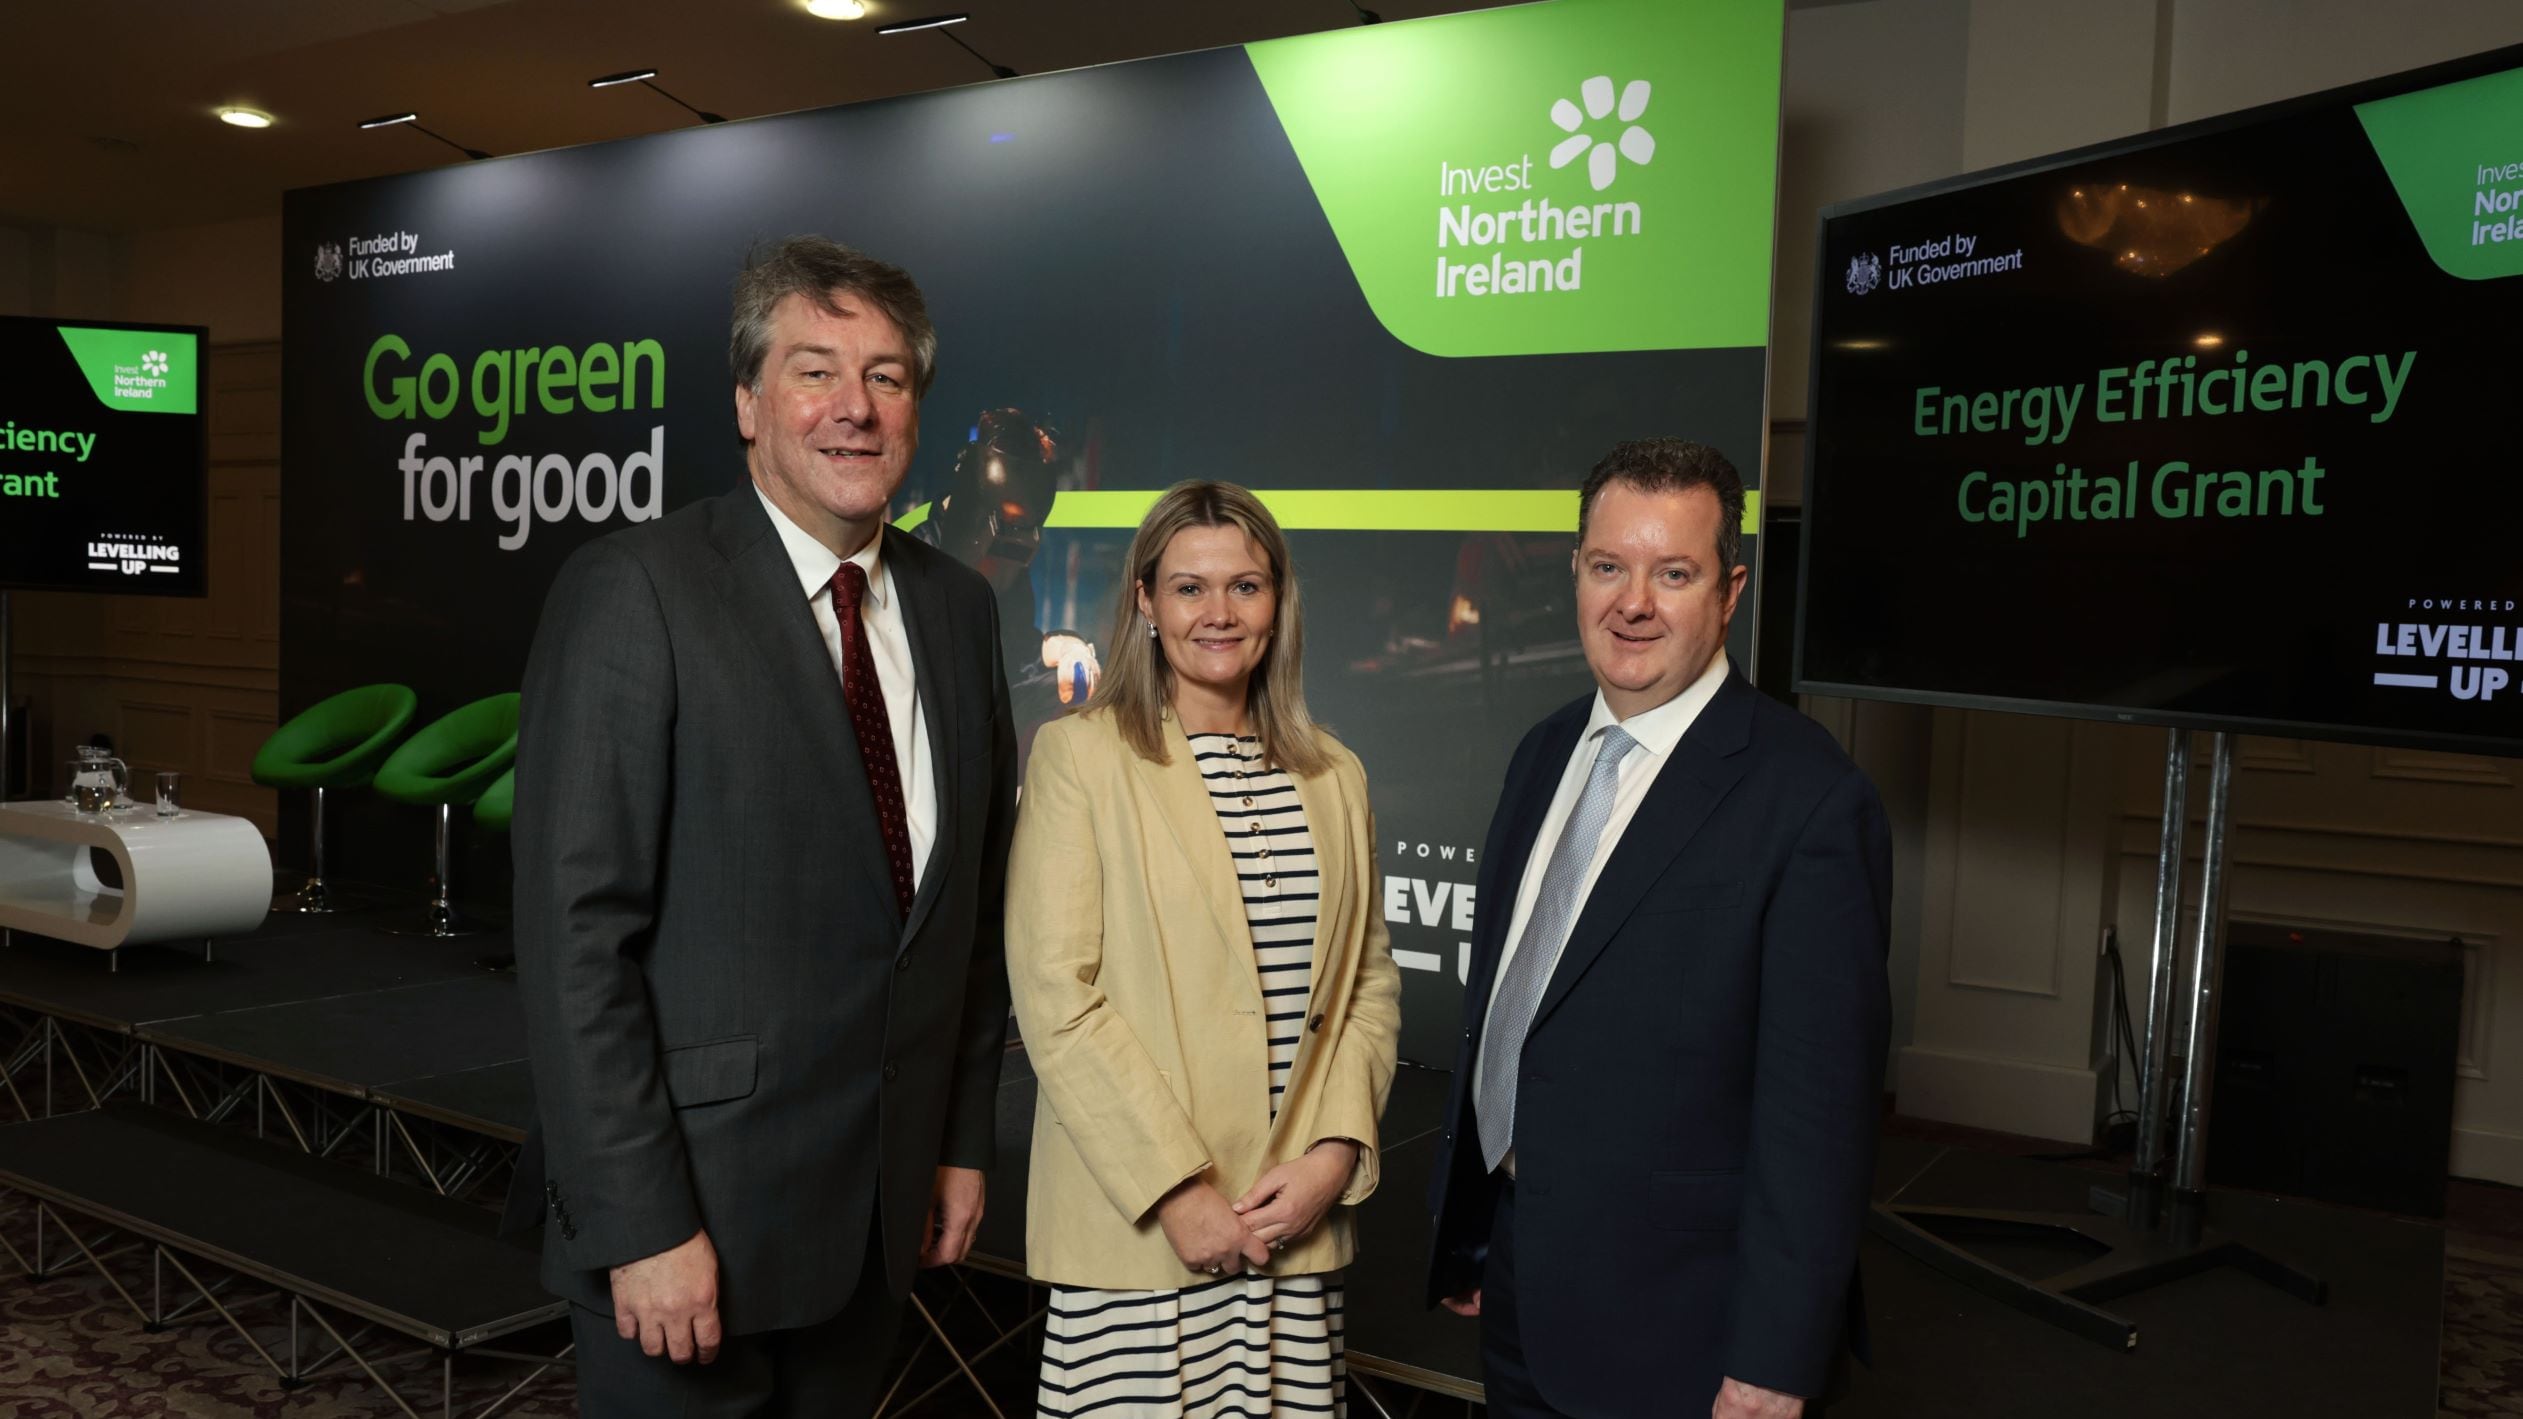 L-R: Ian Snowden, Department for the Economy; Mary Meehan, Manufacturing NI; and Kieran Donoghue, Invest NI, launching the £20m Energy Efficiency Capital Grant scheme at the Seagoe Hotel in Co Armagh on Wednesday.